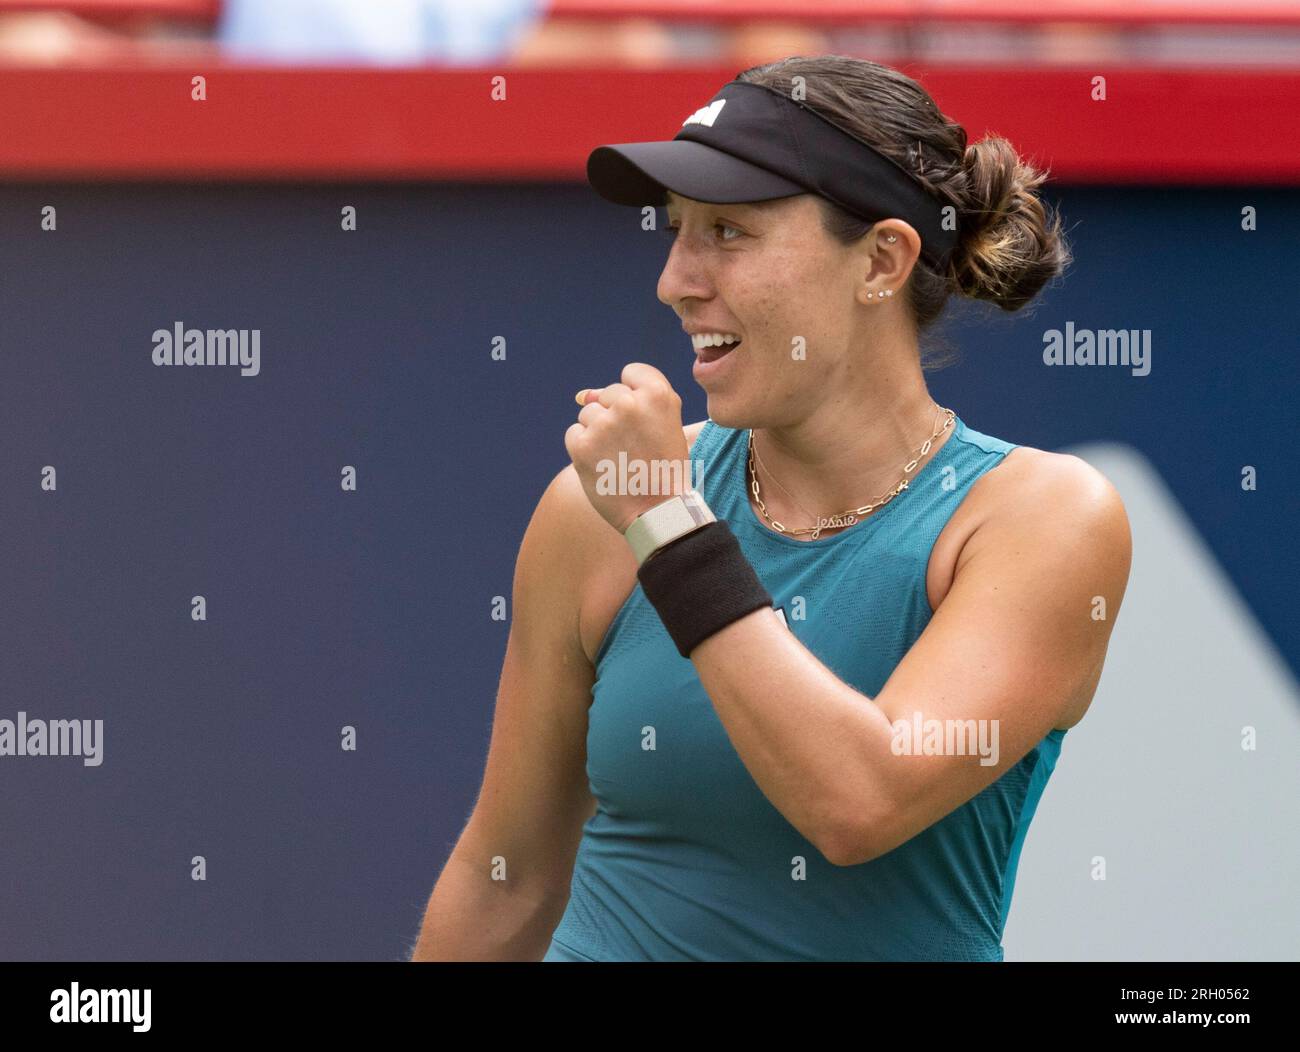 Jessica Pegula of the United States, celebrates her win over Iga Swiatek of Poland, during the semifinals of the National Bank Open womens tennis tournament Saturday, Aug